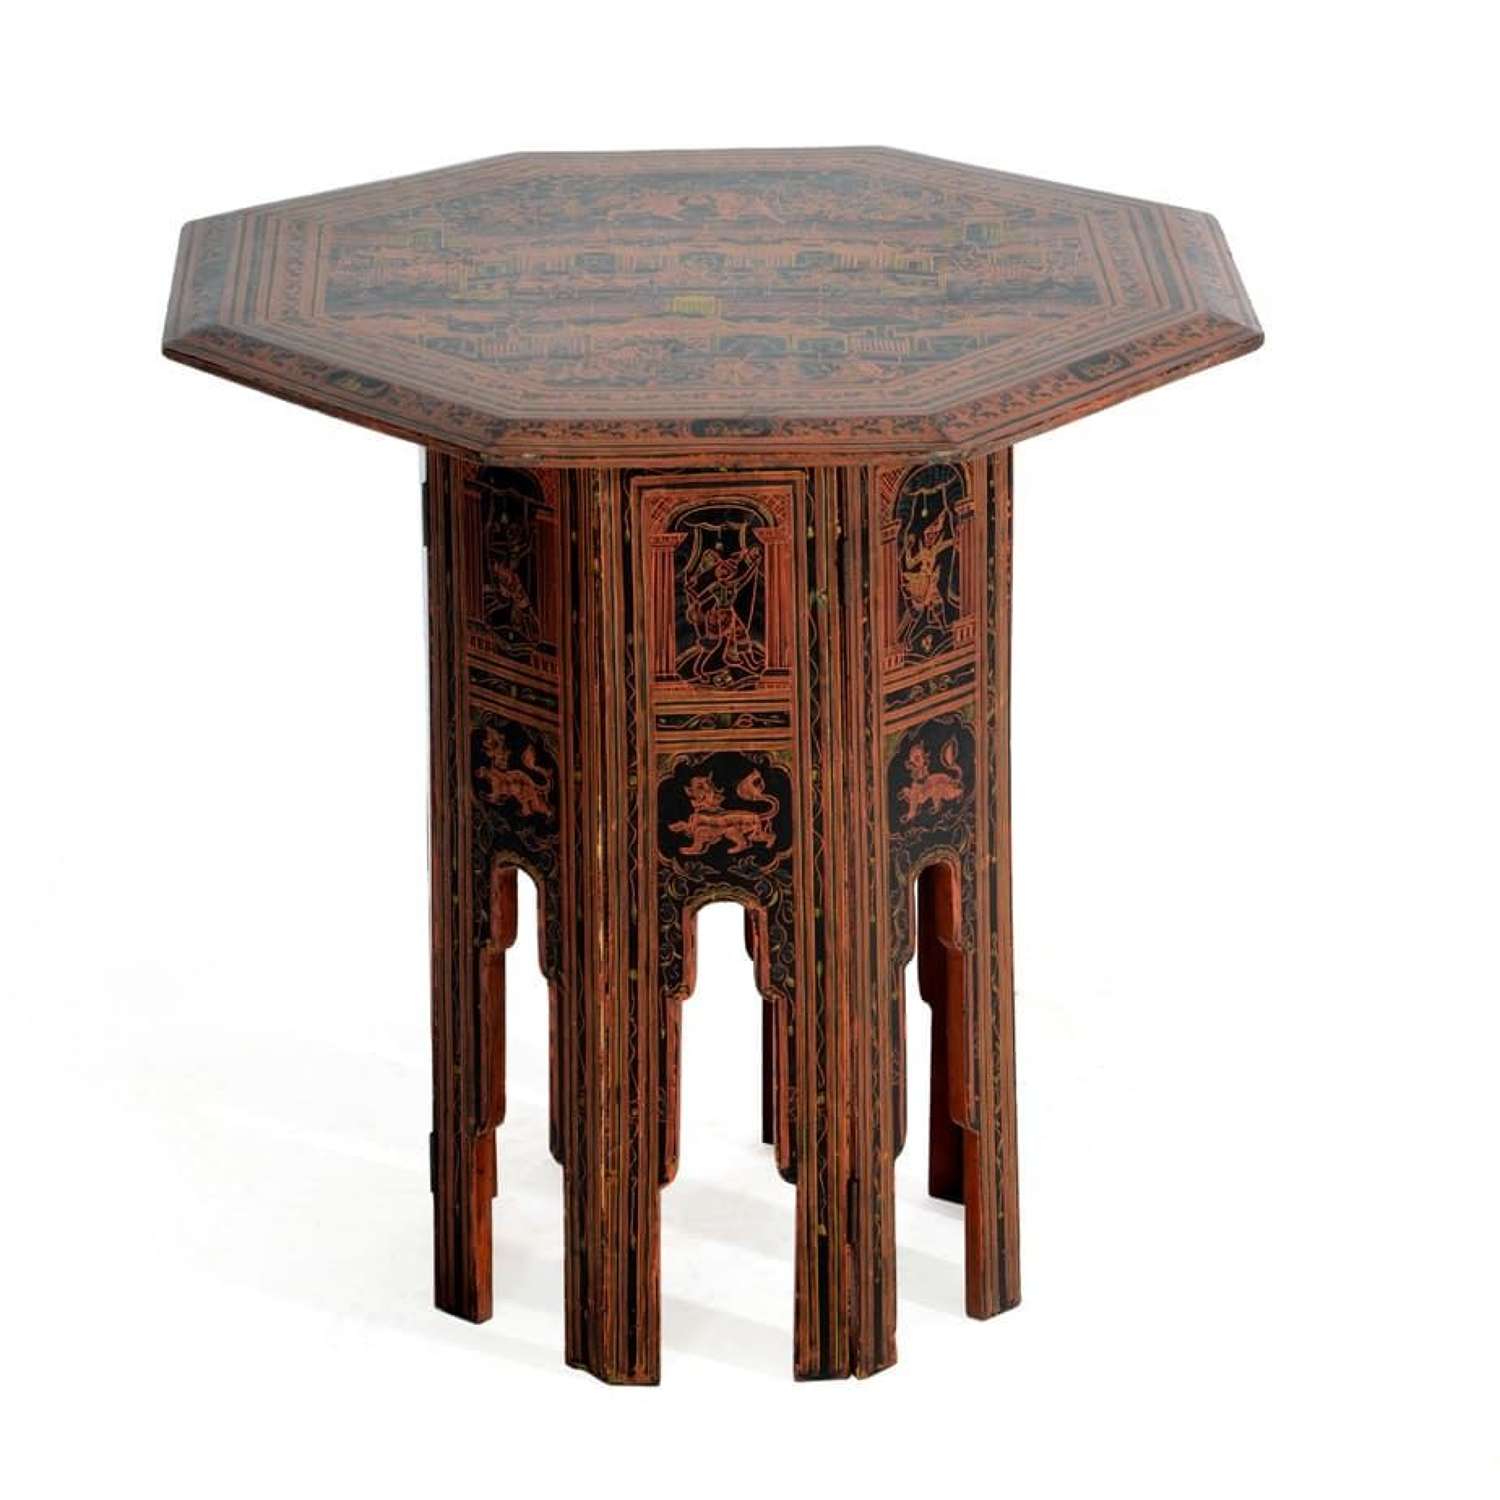 Indian red lacquer table